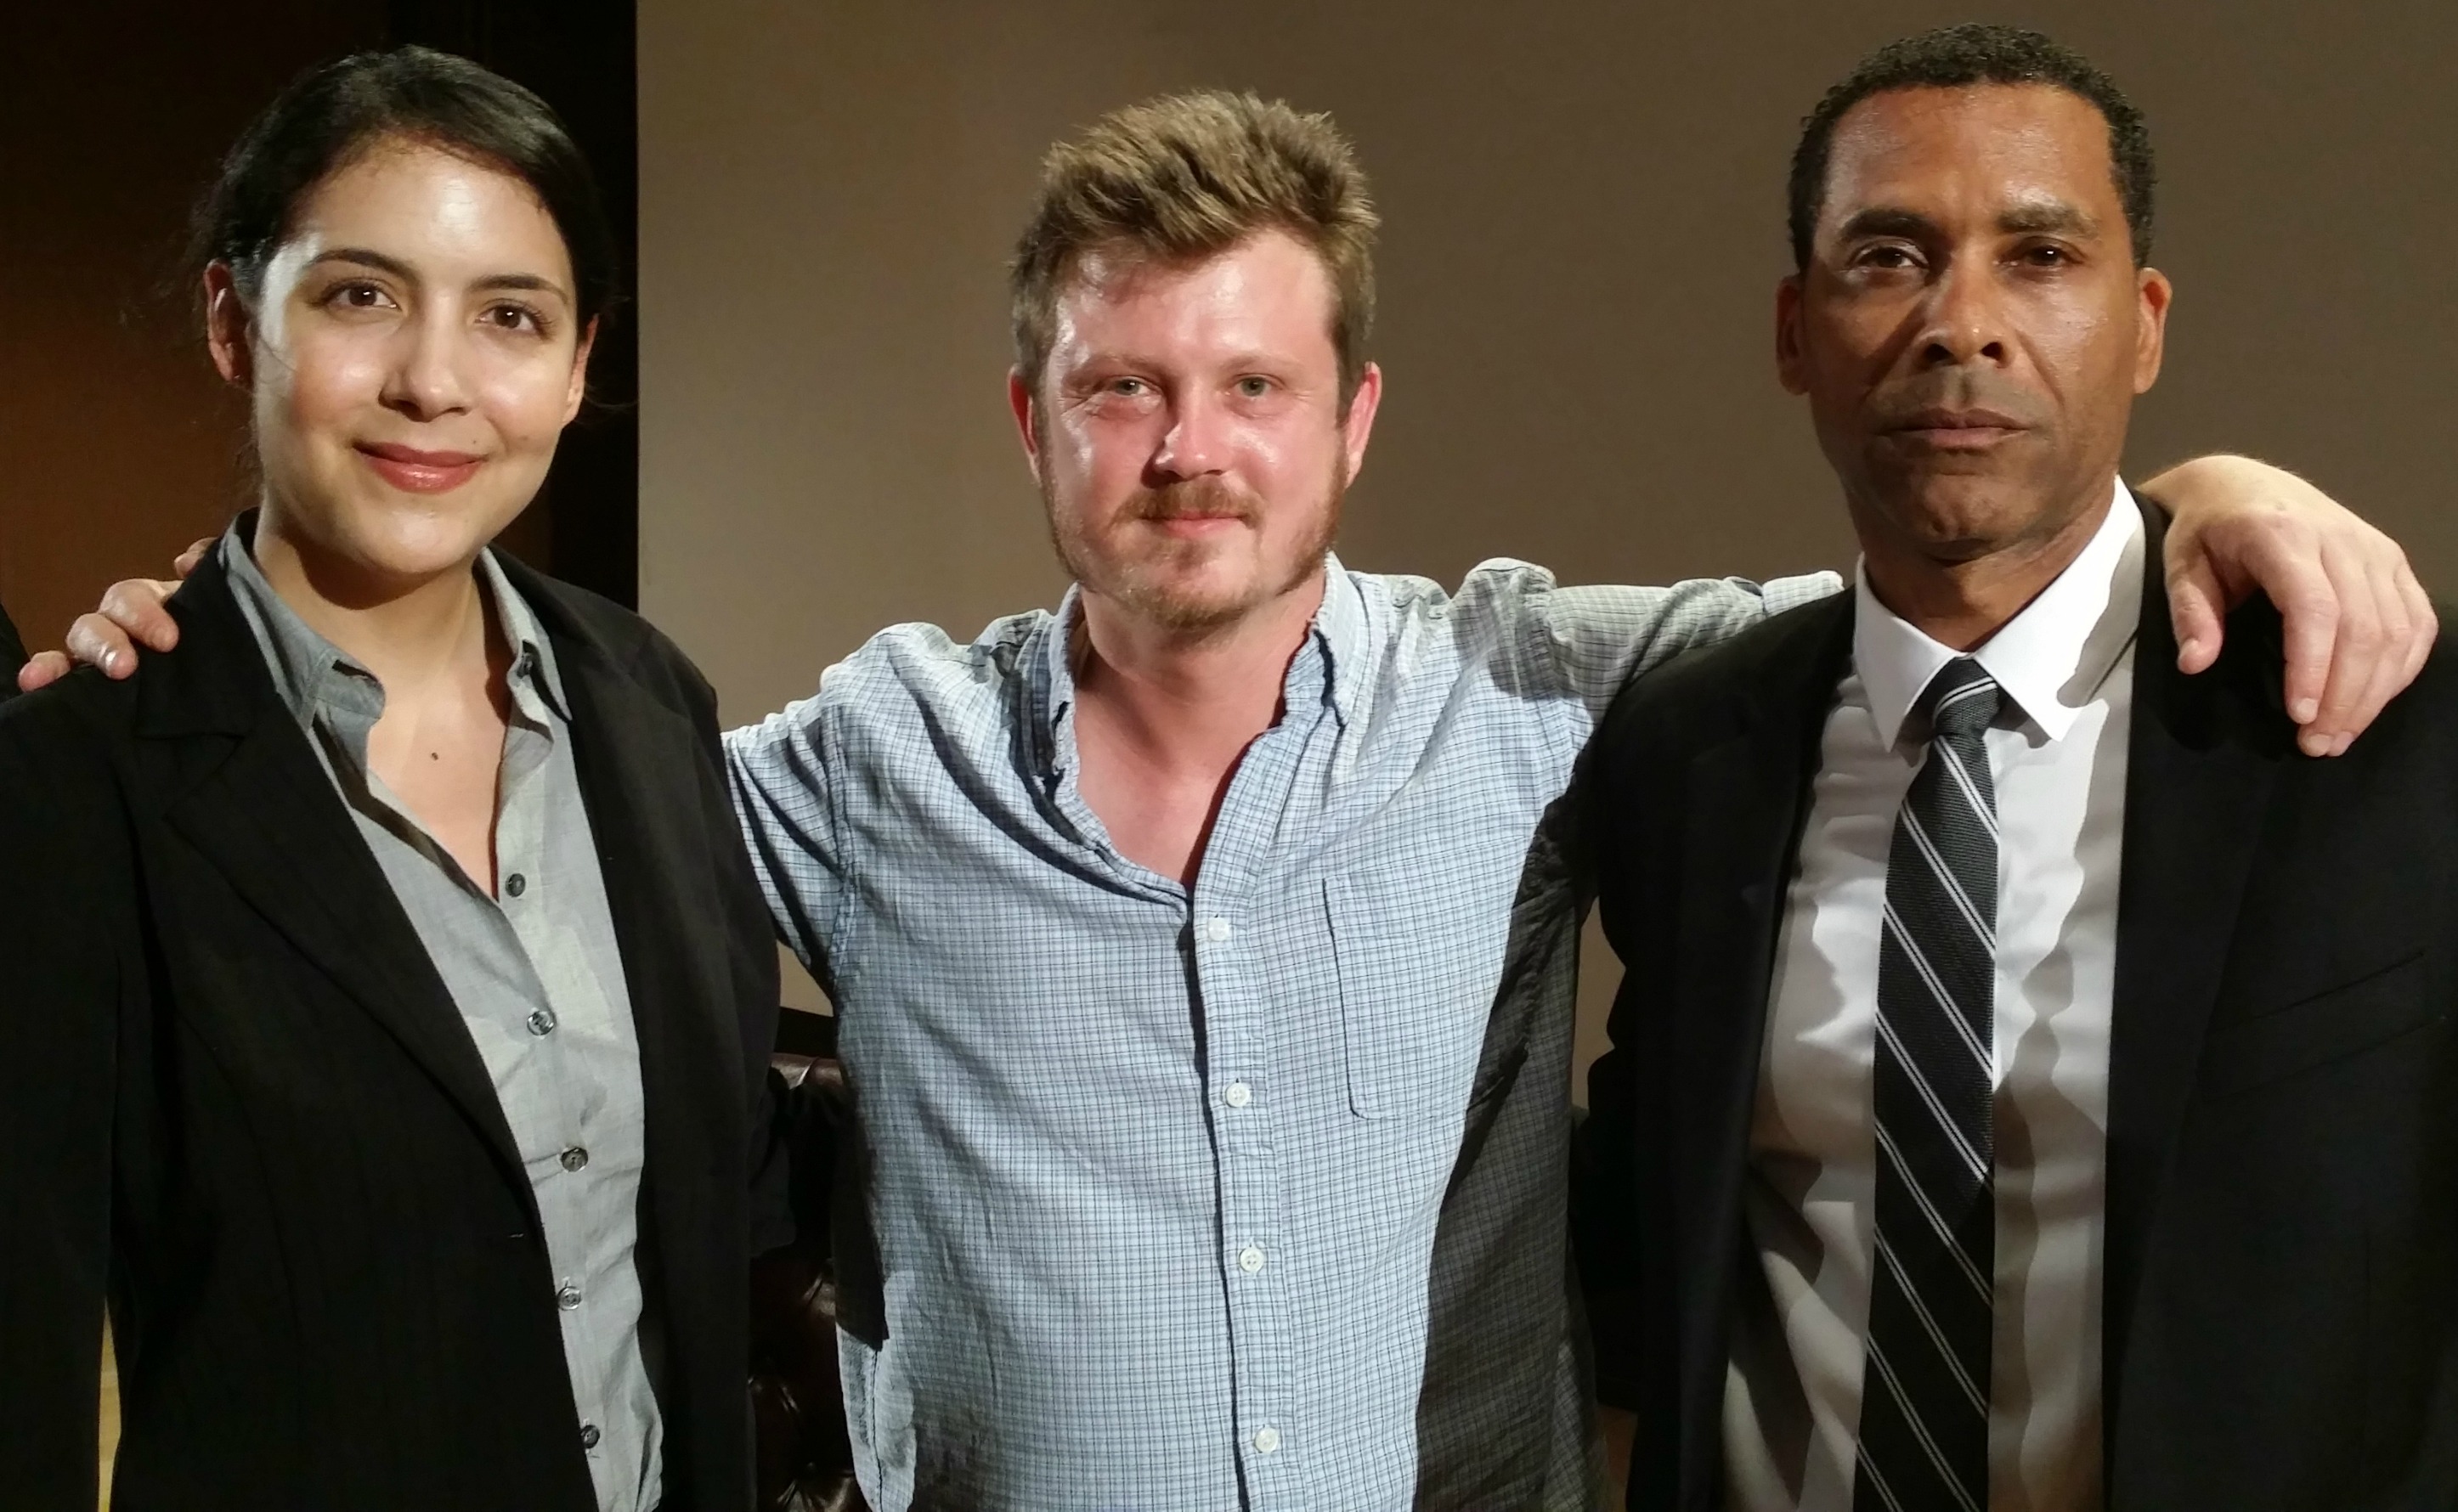 Catalina Parks (Claire's Secret Service), Netflix House of Cards Writer and Executive Producer Beau Willimon and Lamont Easter (Underwood Secret Service)